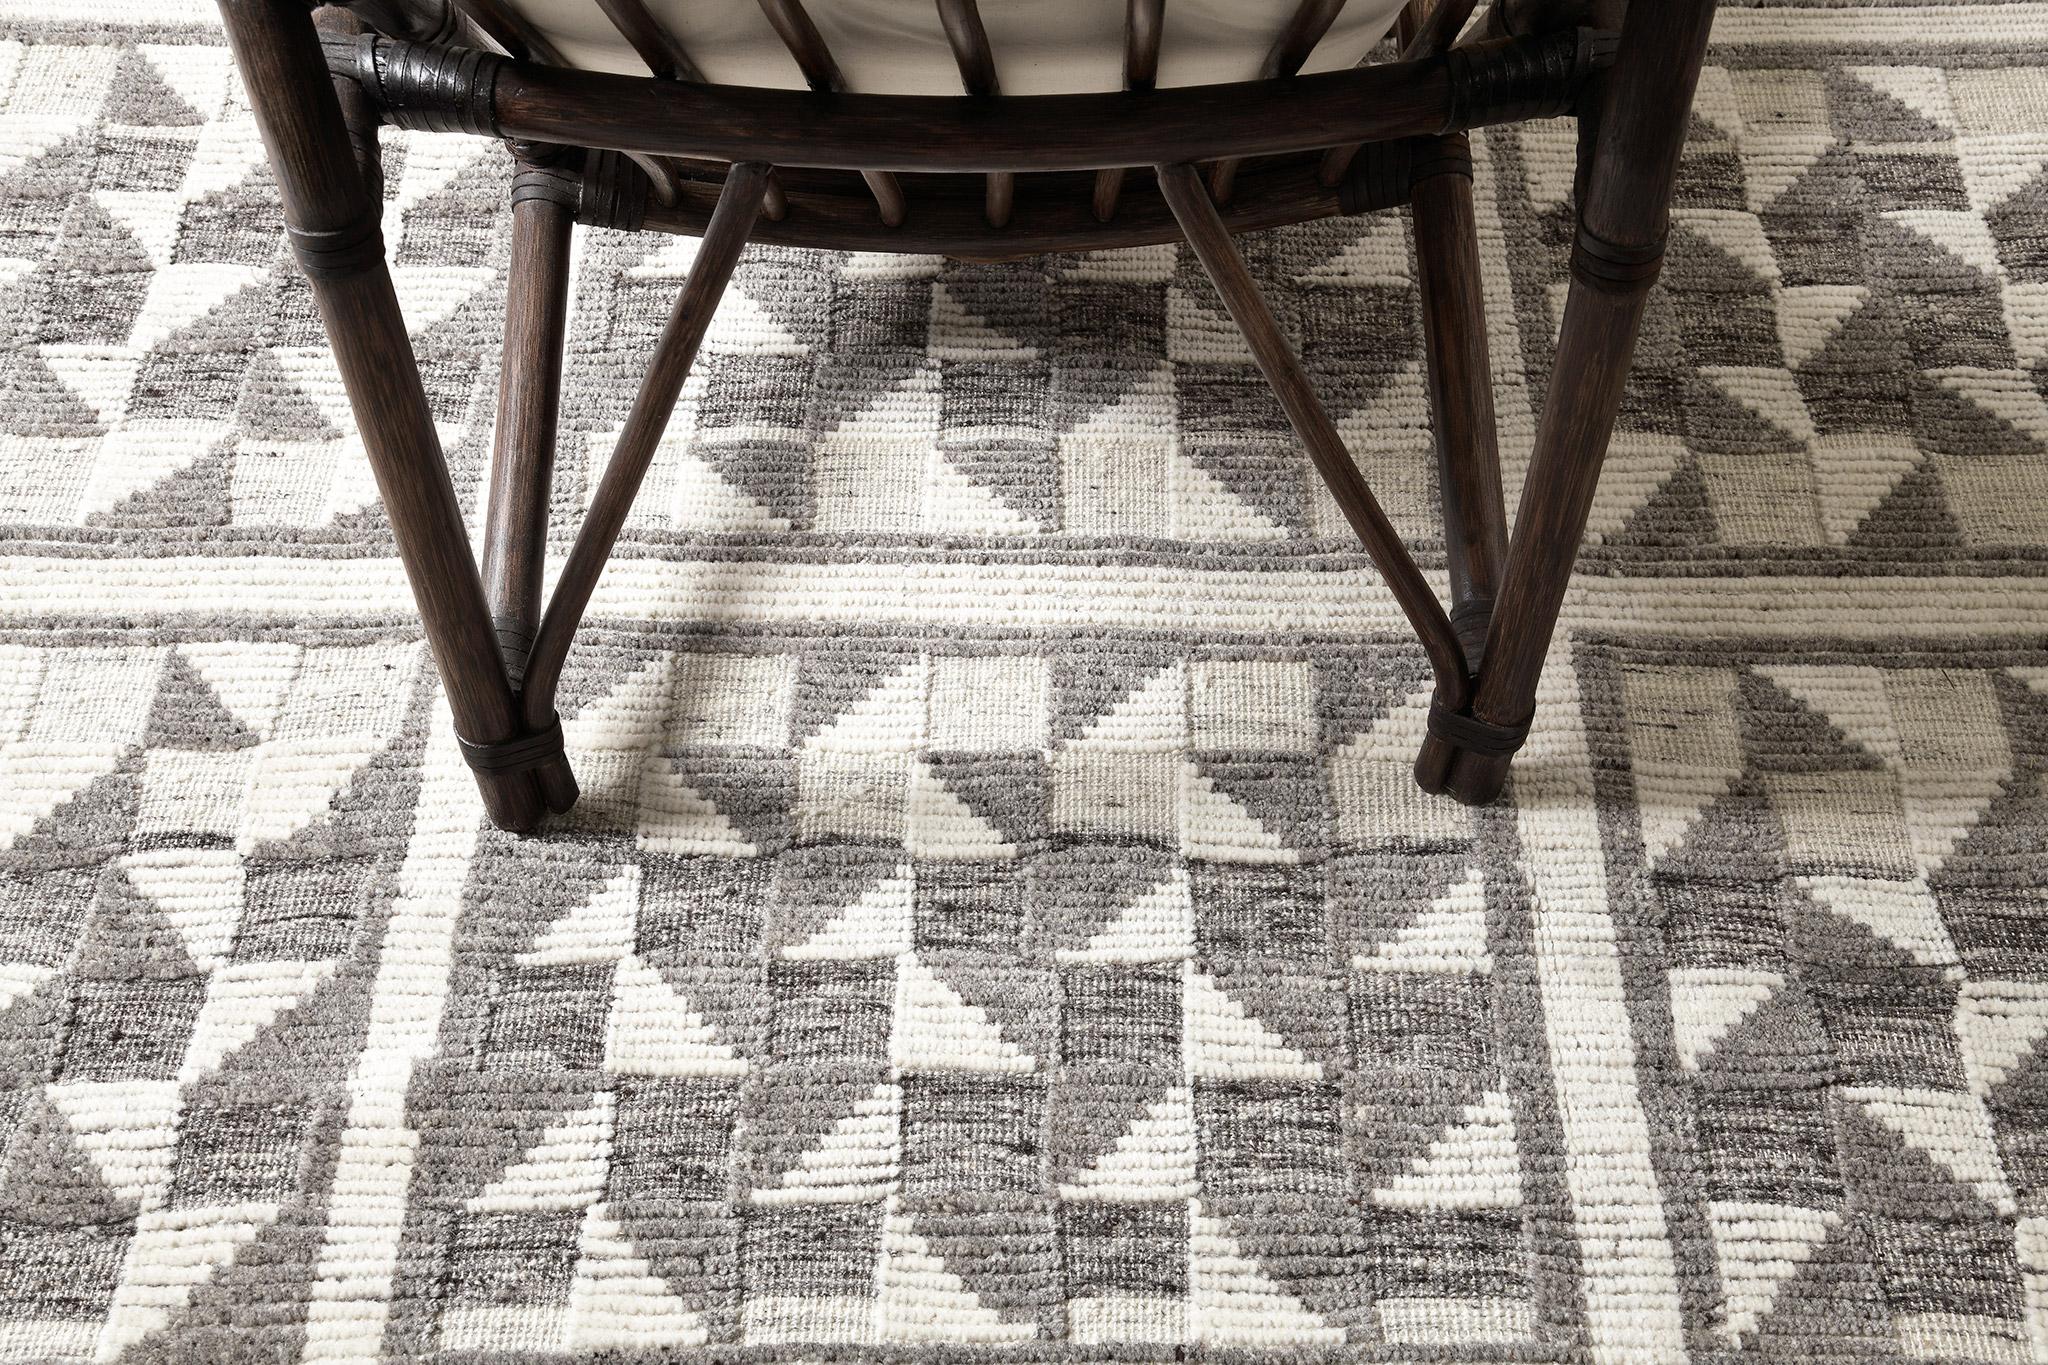 Revealing the panel design geometric motifs, Franc’ in Estancia Collection boasts its character and style. This captivating rug features stunning earthy toned shades in gray and ivory. This rug creates an impressive pattern perfect to be placed on